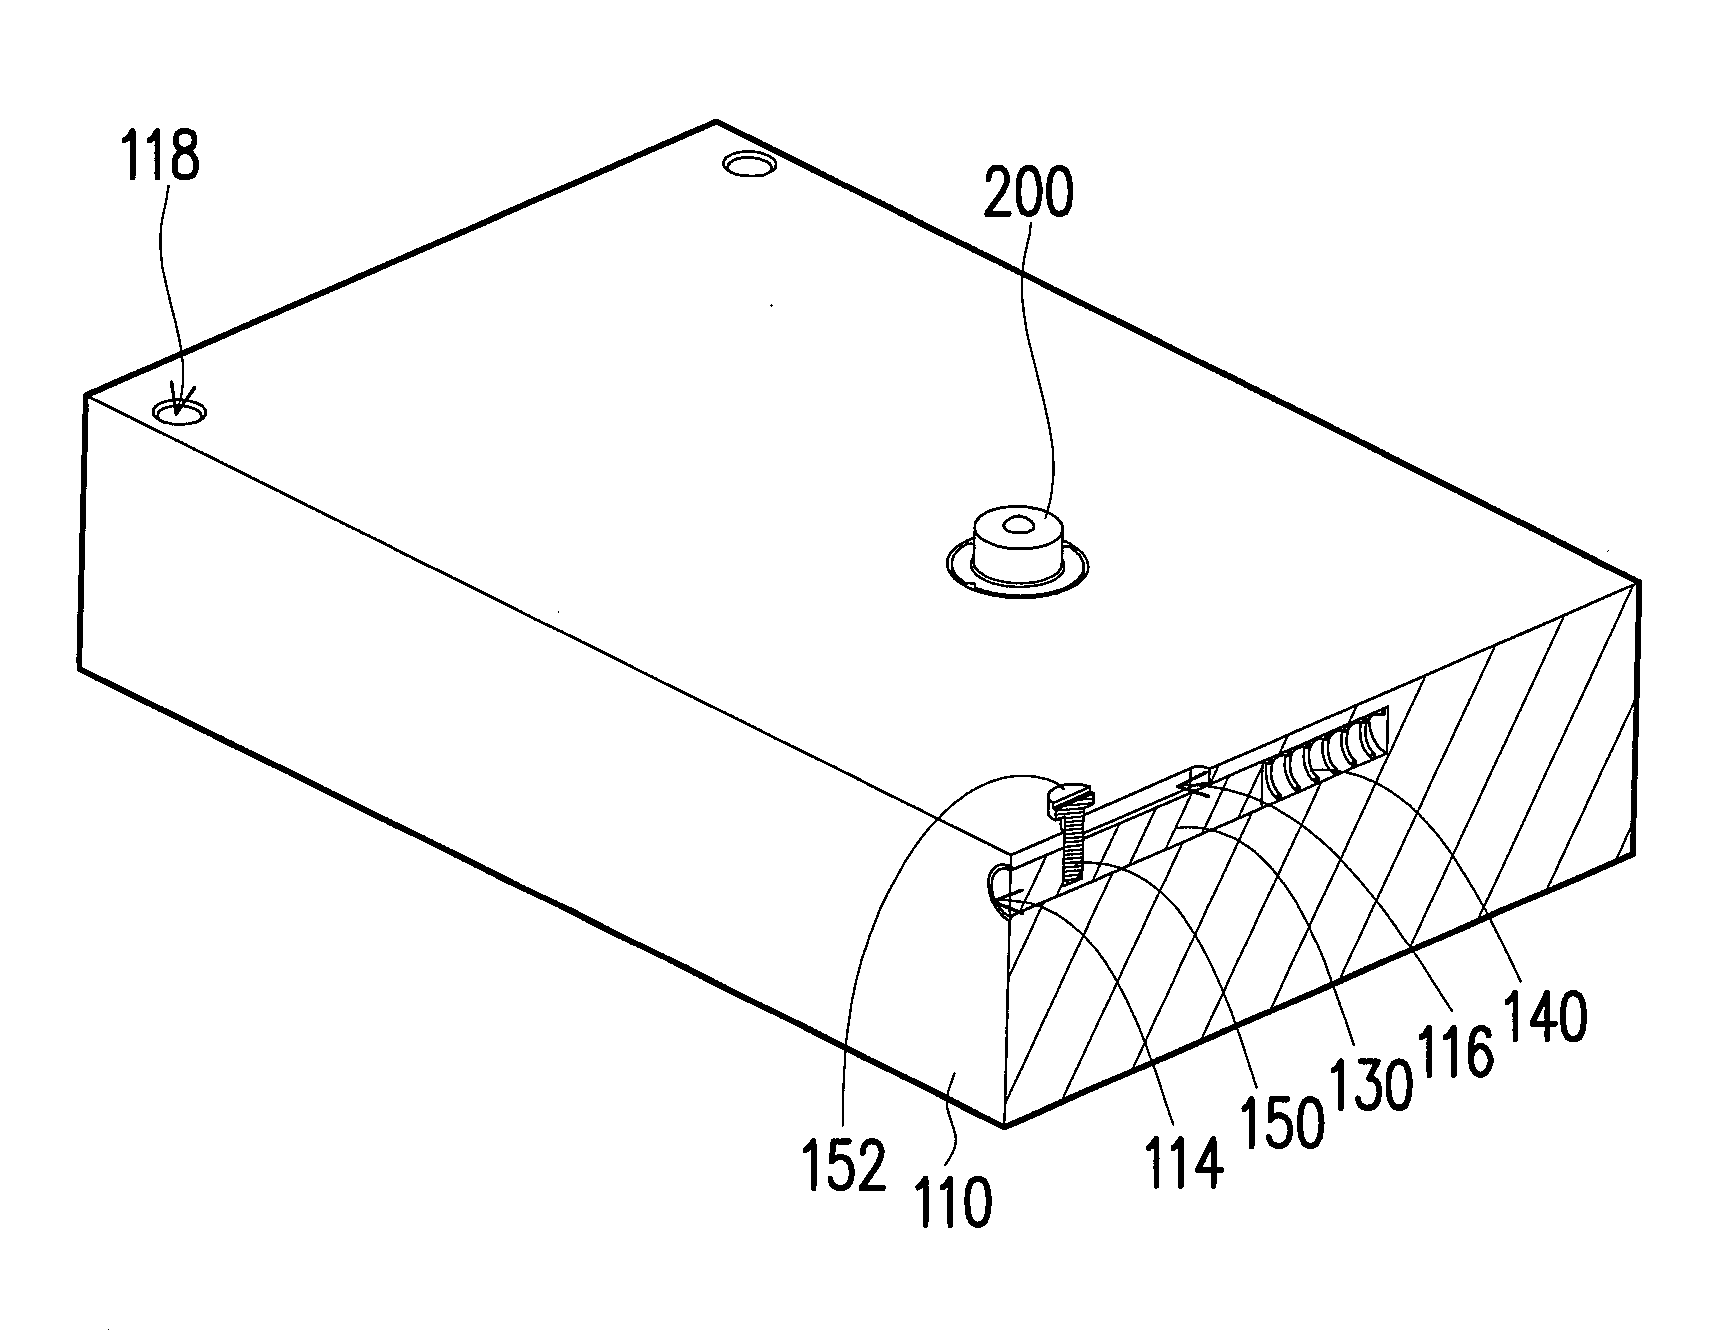 Apparatus casing, projection system and assembling method of apparatus casing